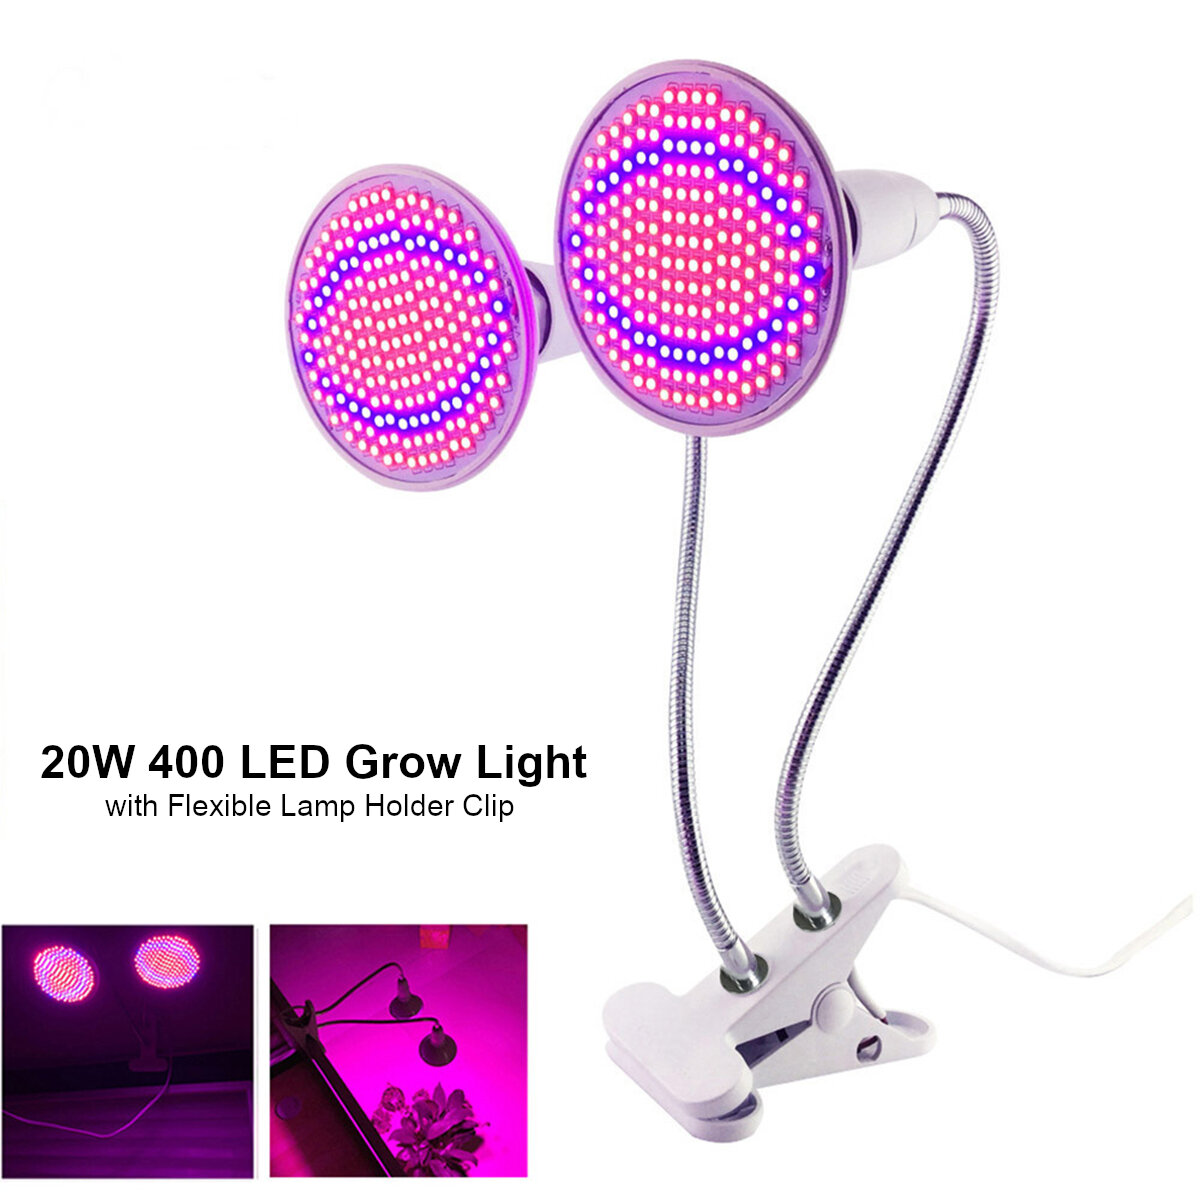 Dual Heads 20W LED Plant Grow Light with Lamp Holder Clip For Home Indoor Vegetable Flowers AC85-265